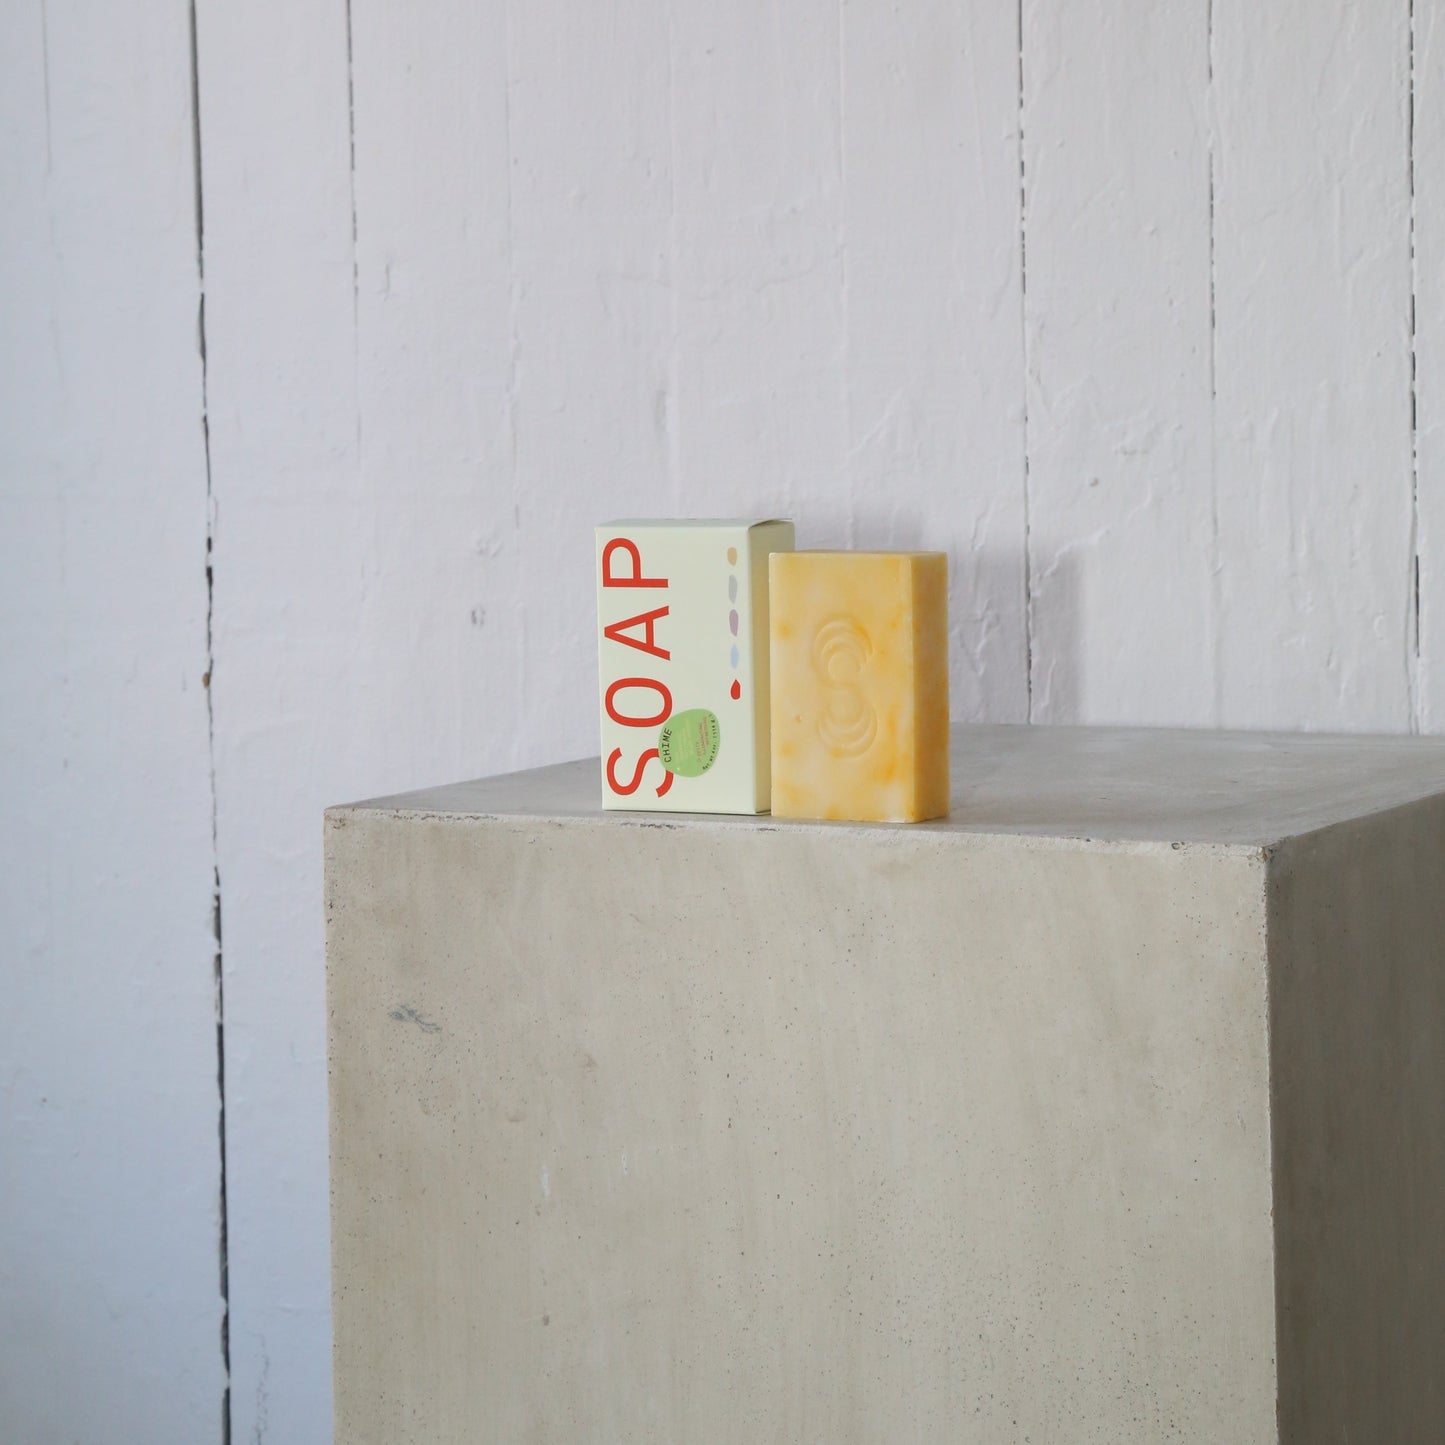 Sounds Chime Soap Bar available at Rook & Rose.